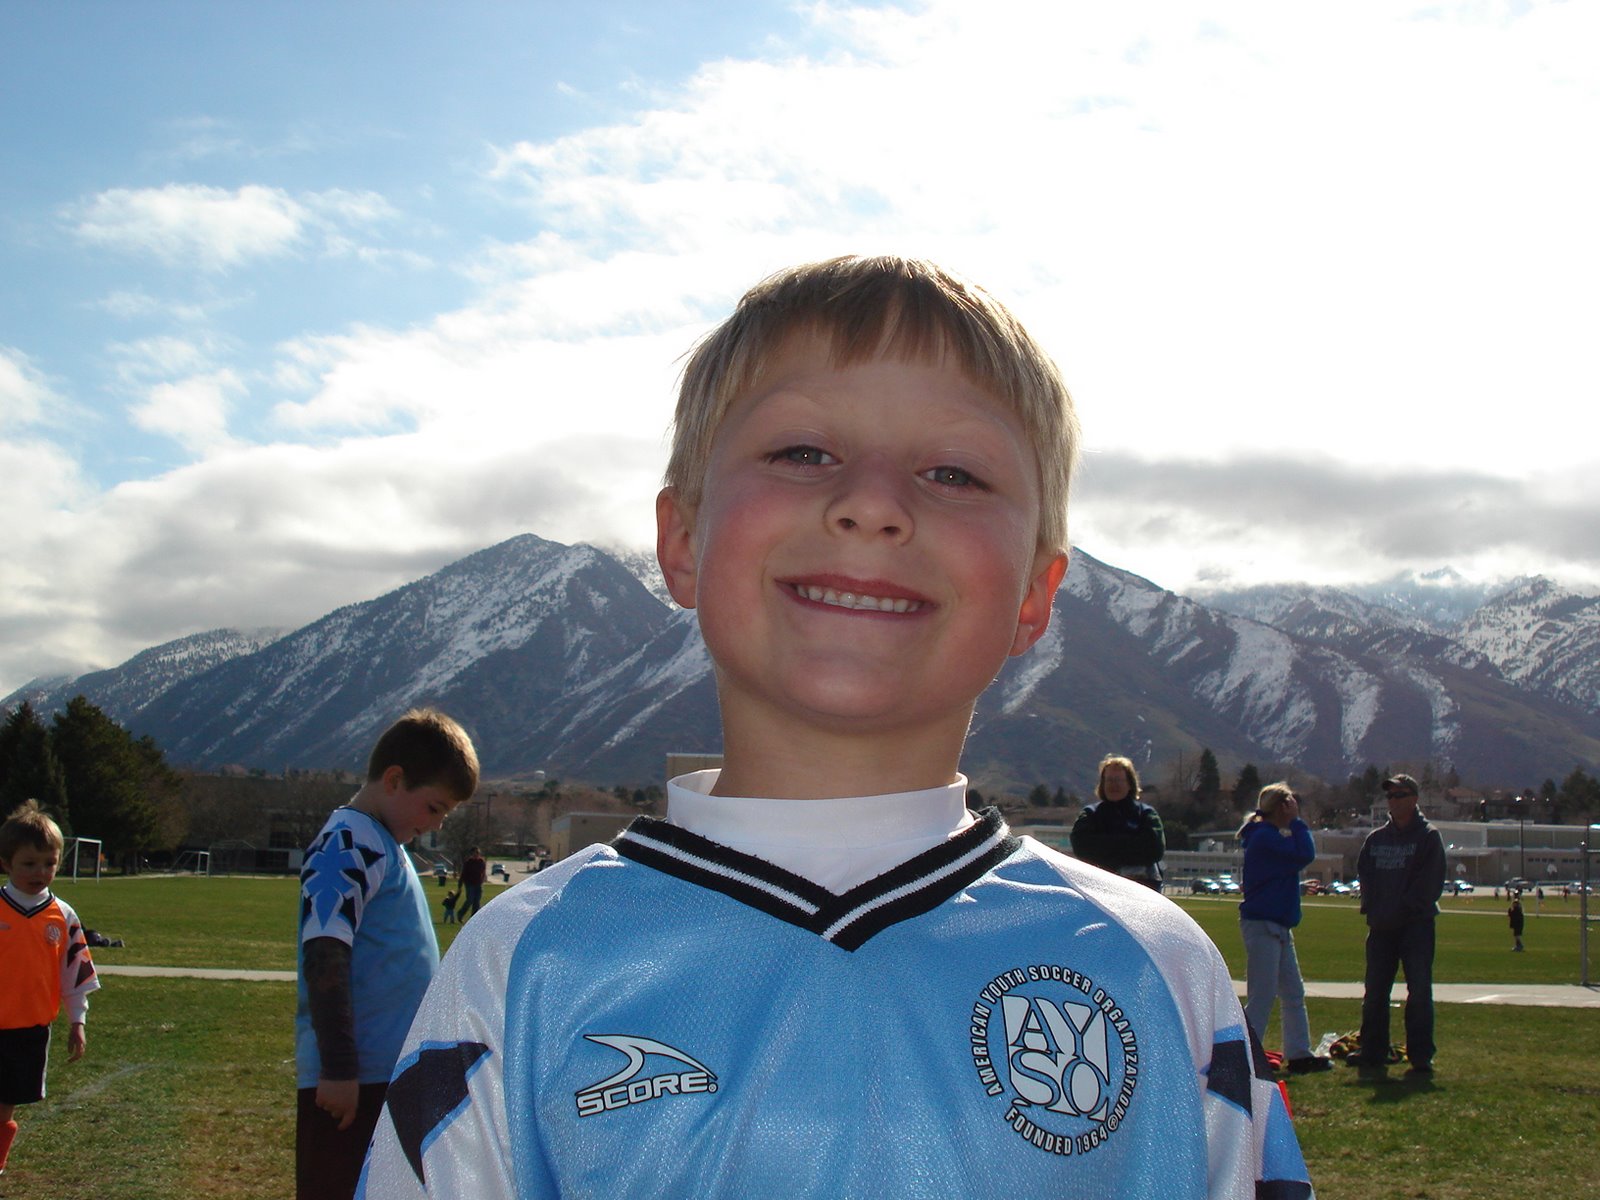 [scouts+soccer+and+landon+007.jpg]